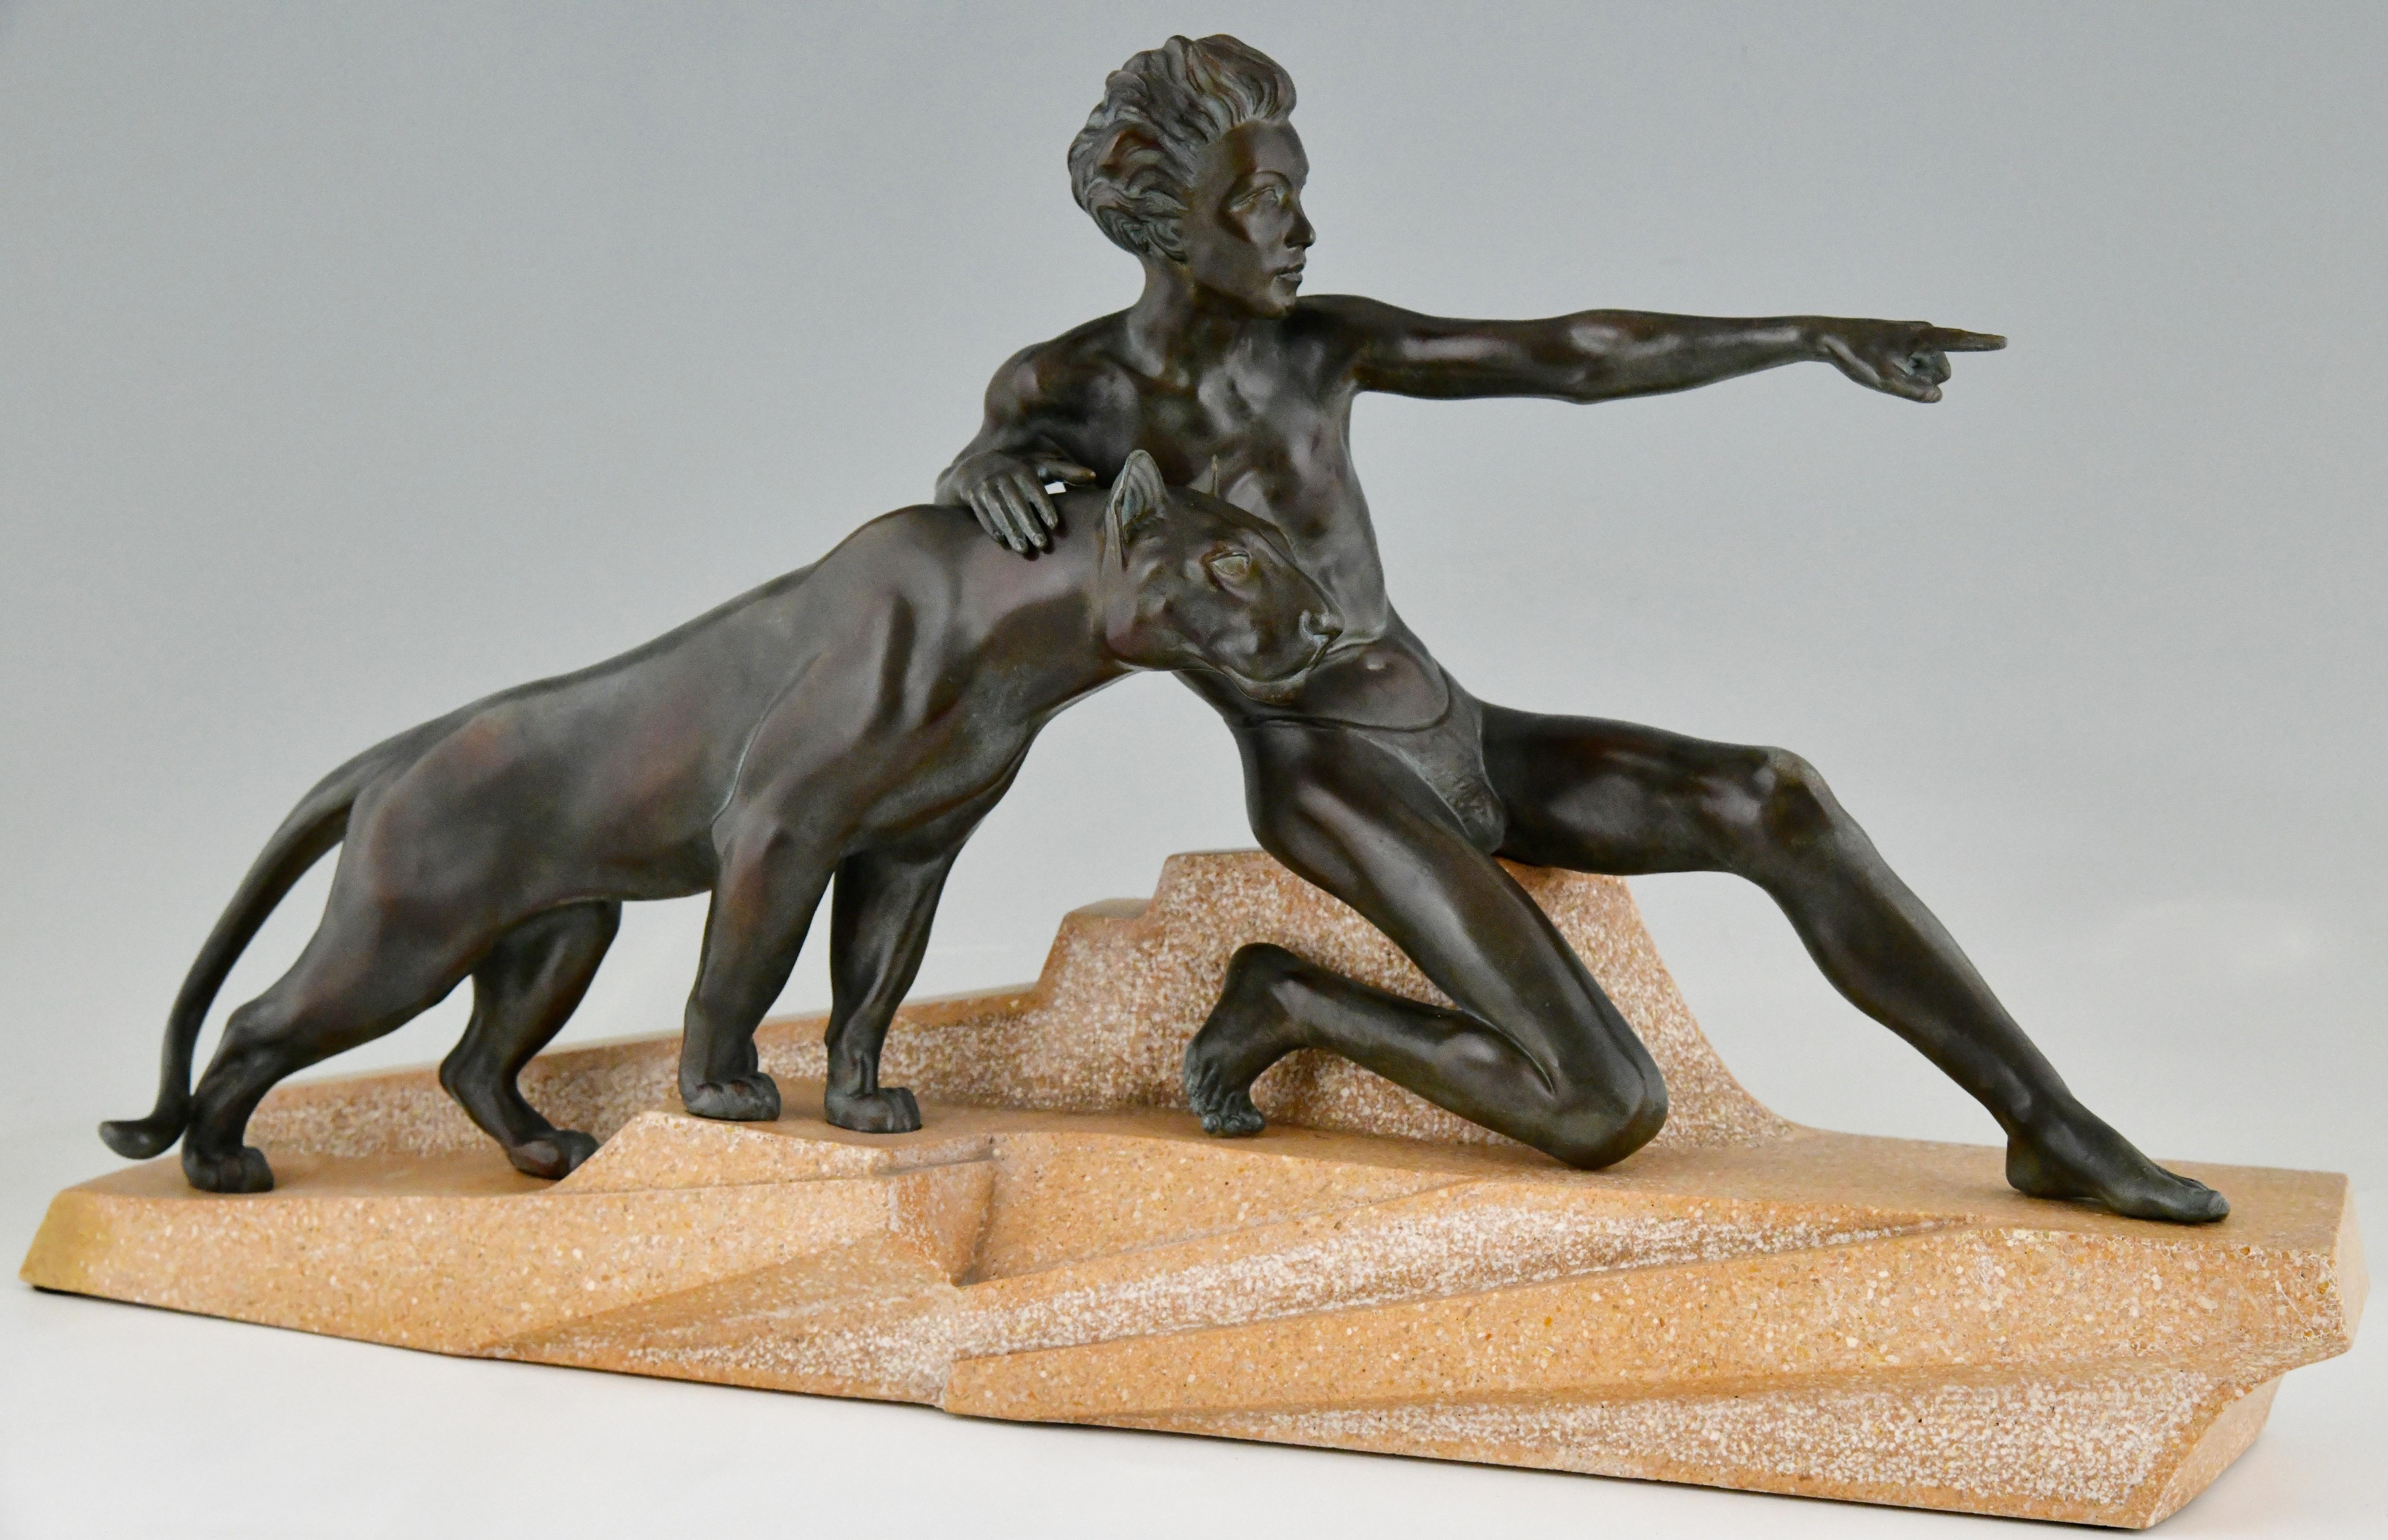 Art Deco sculpture young man with panther by Max Le Verrier. 
The sculpture is executed in patinated Art metal and stands on a carved stone base. 
France 1930. 
Literature:
Art Deco sculpture by Alistair Duncan.
Statuettes of the Art Deco period